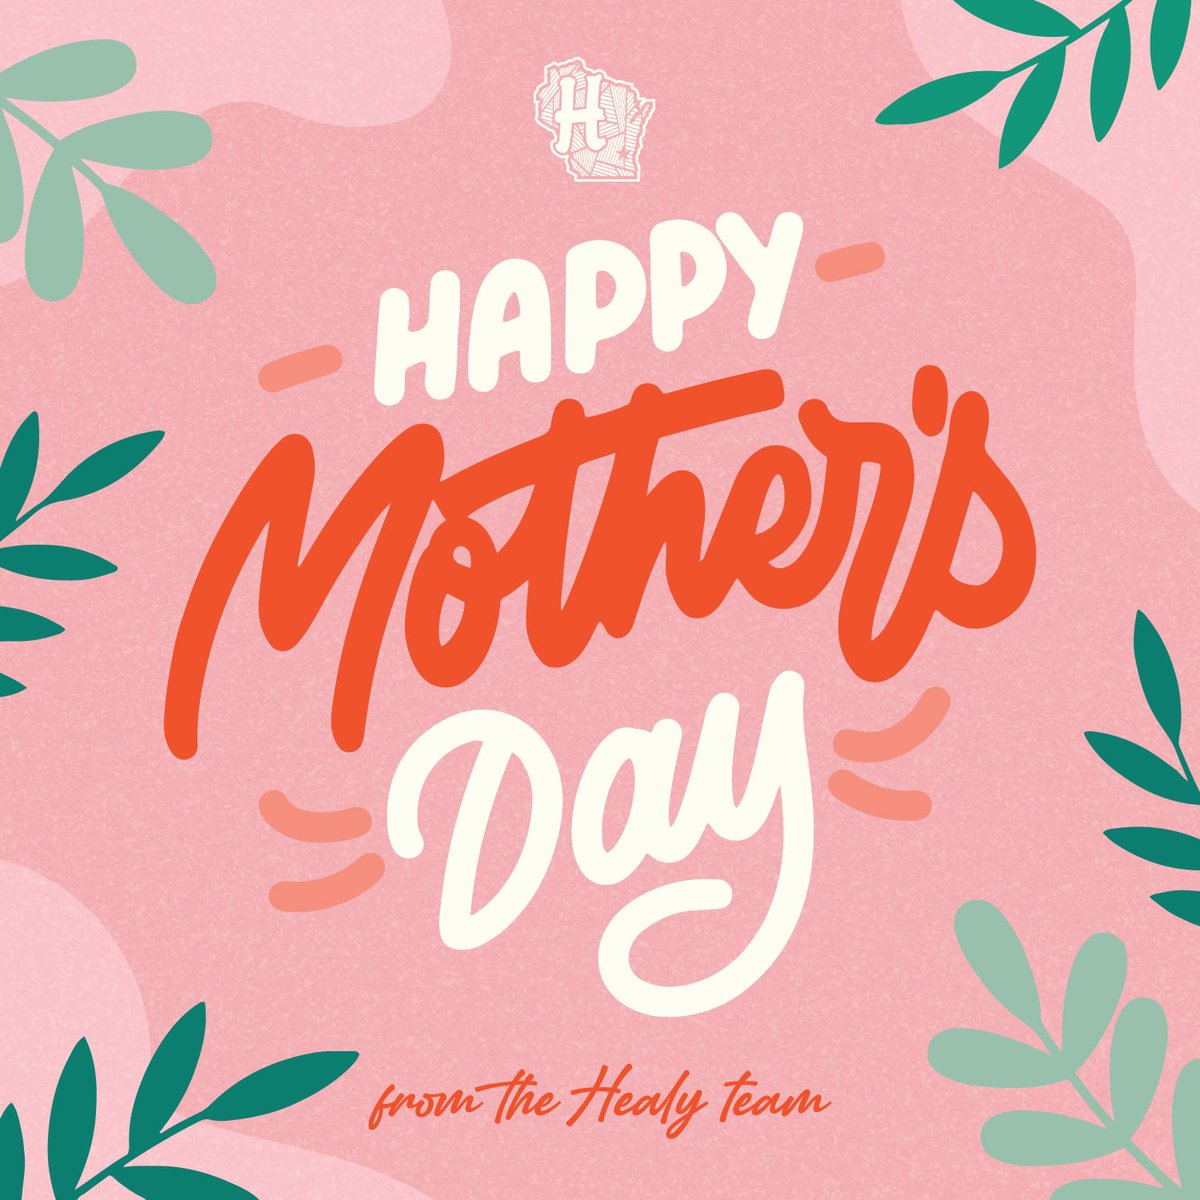 Happy Mother's Day from Healy Awards! To all the amazing moms: your strength, love, and guidance are unmatched. Thank you for all you do. Wishing you a day filled with joy and appreciation. 💐 #HappyMothersDay